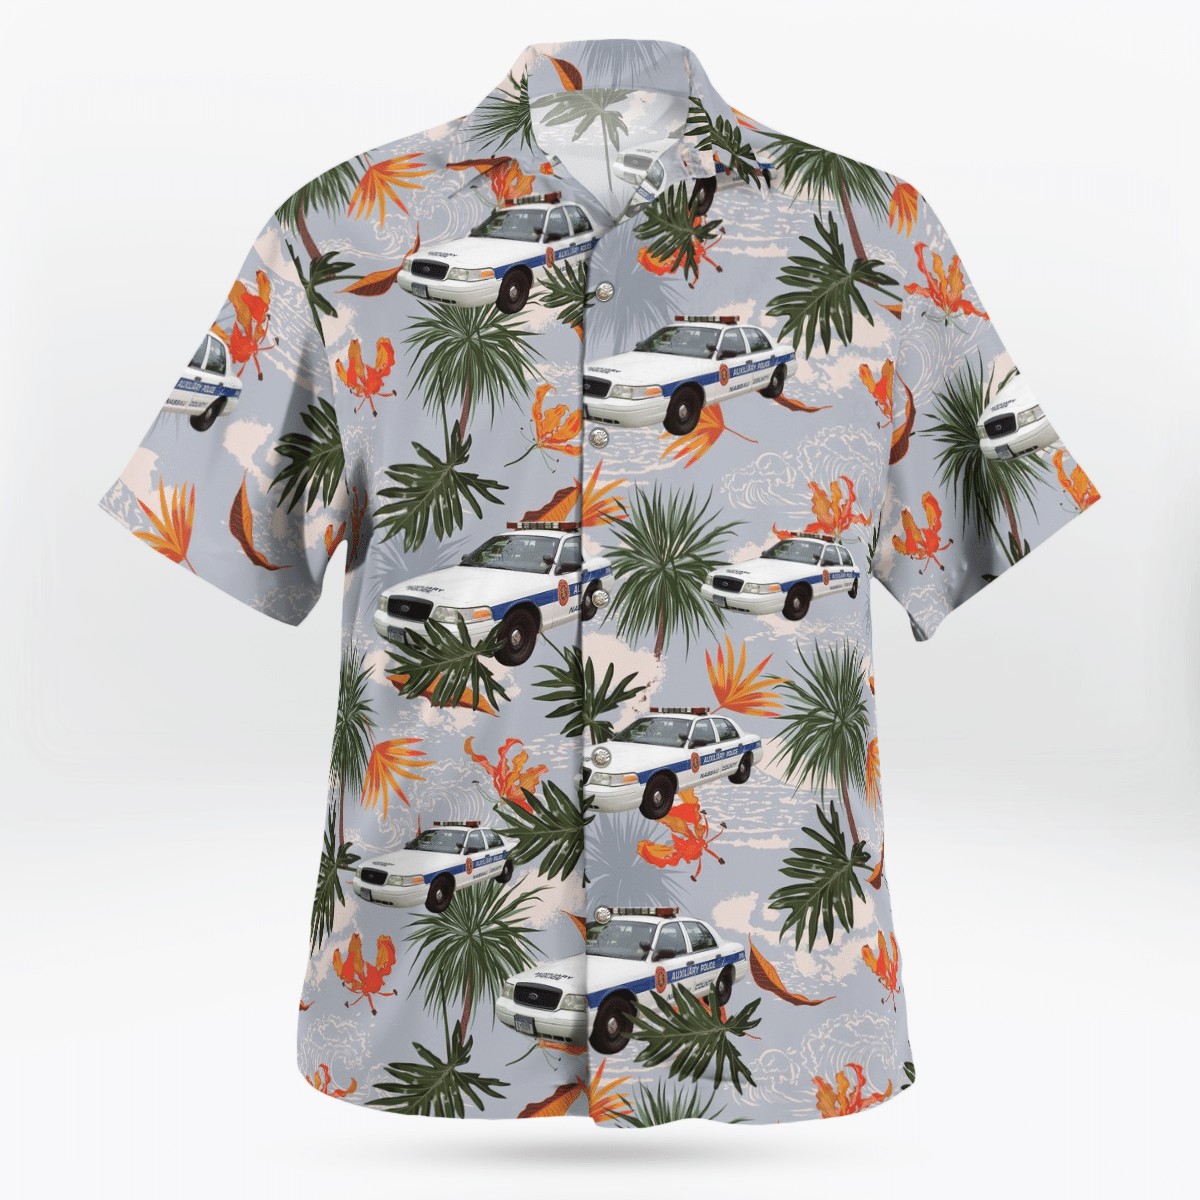 Hawaiian shirts never go out of style 218